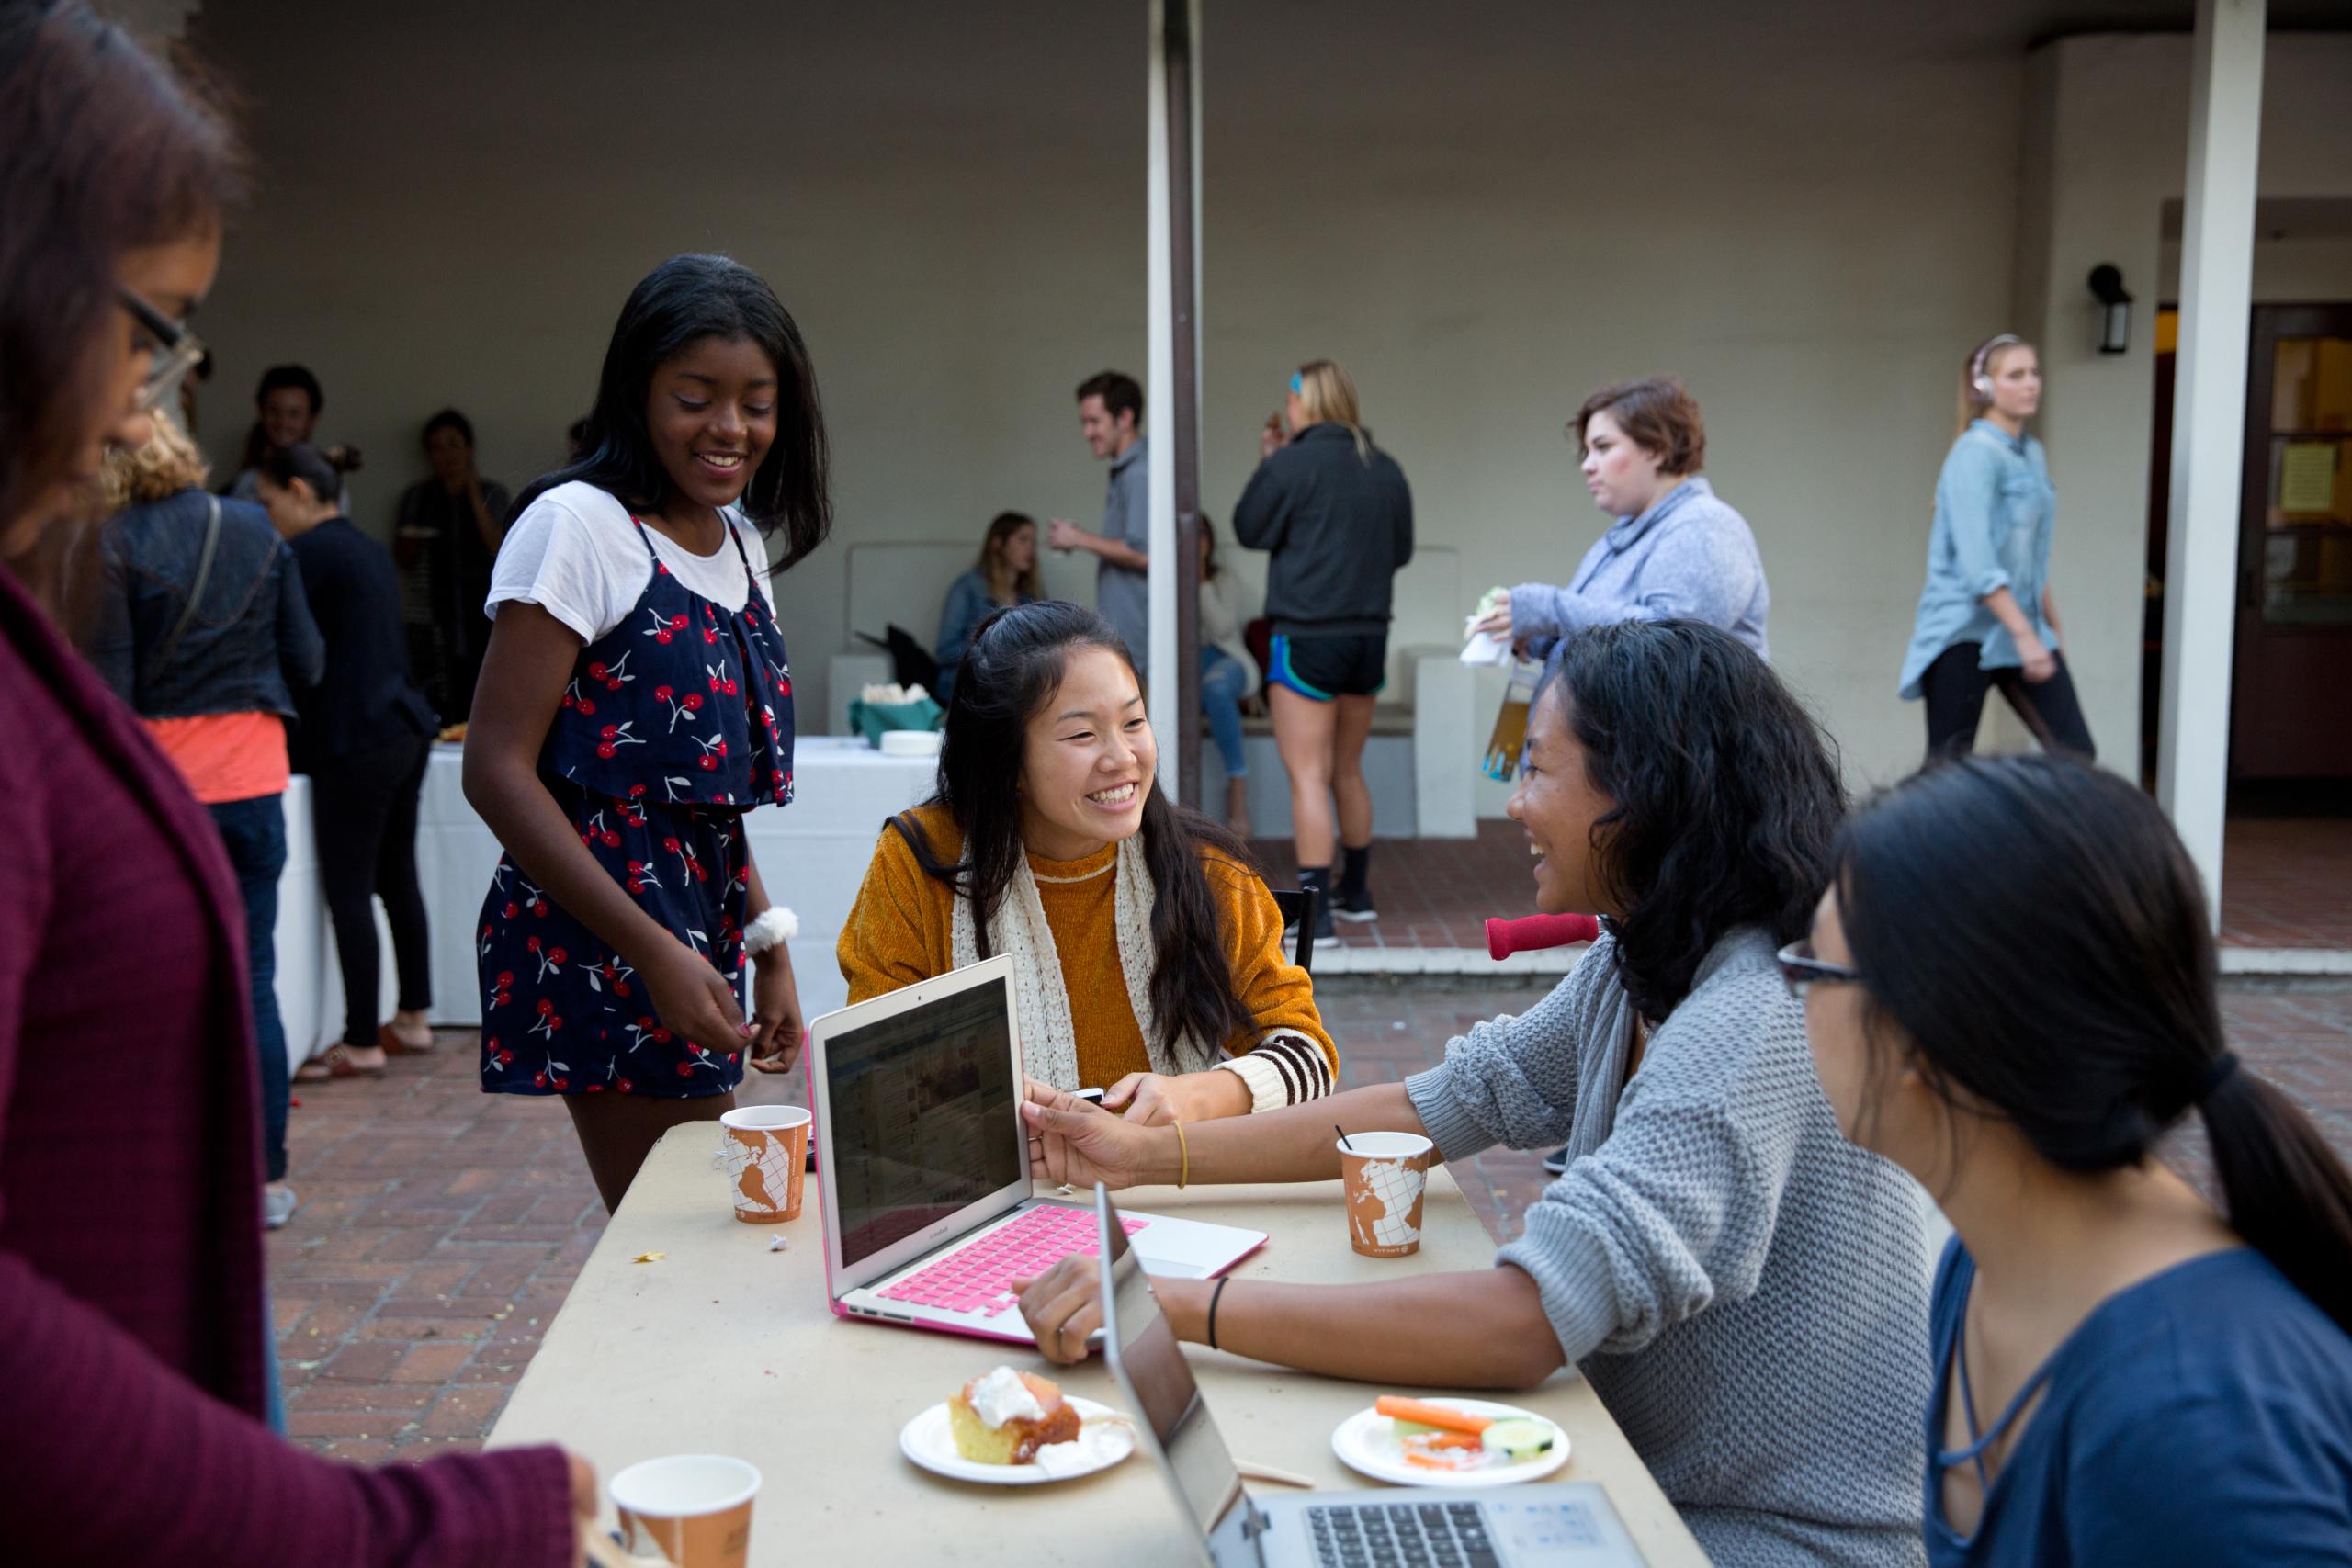 Group of Scripps students gathered in courtyard with snacks